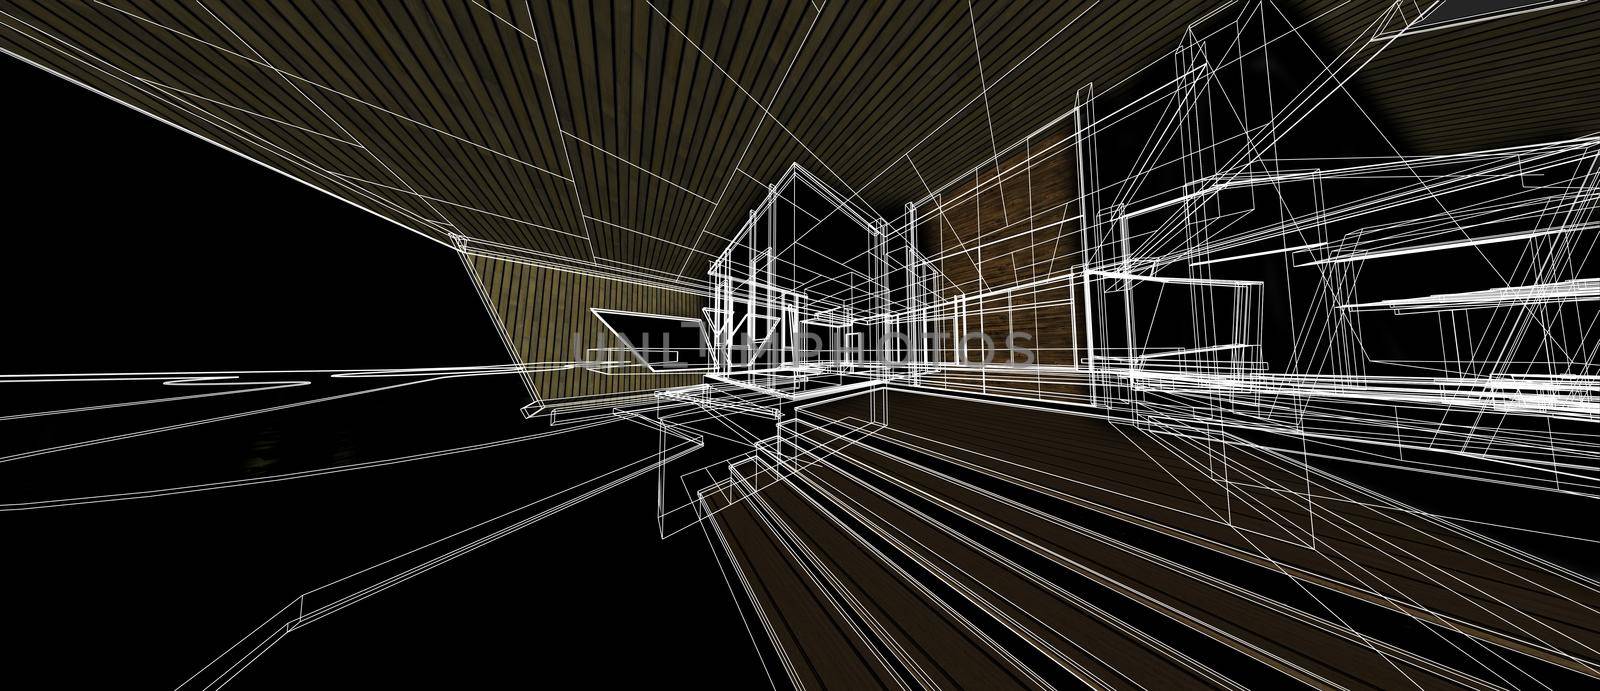 Architecture house space design concept 3d perspective wireframe rendering isolated black background. For abstract background or wallpaper desktops computer technology design architectural theme.